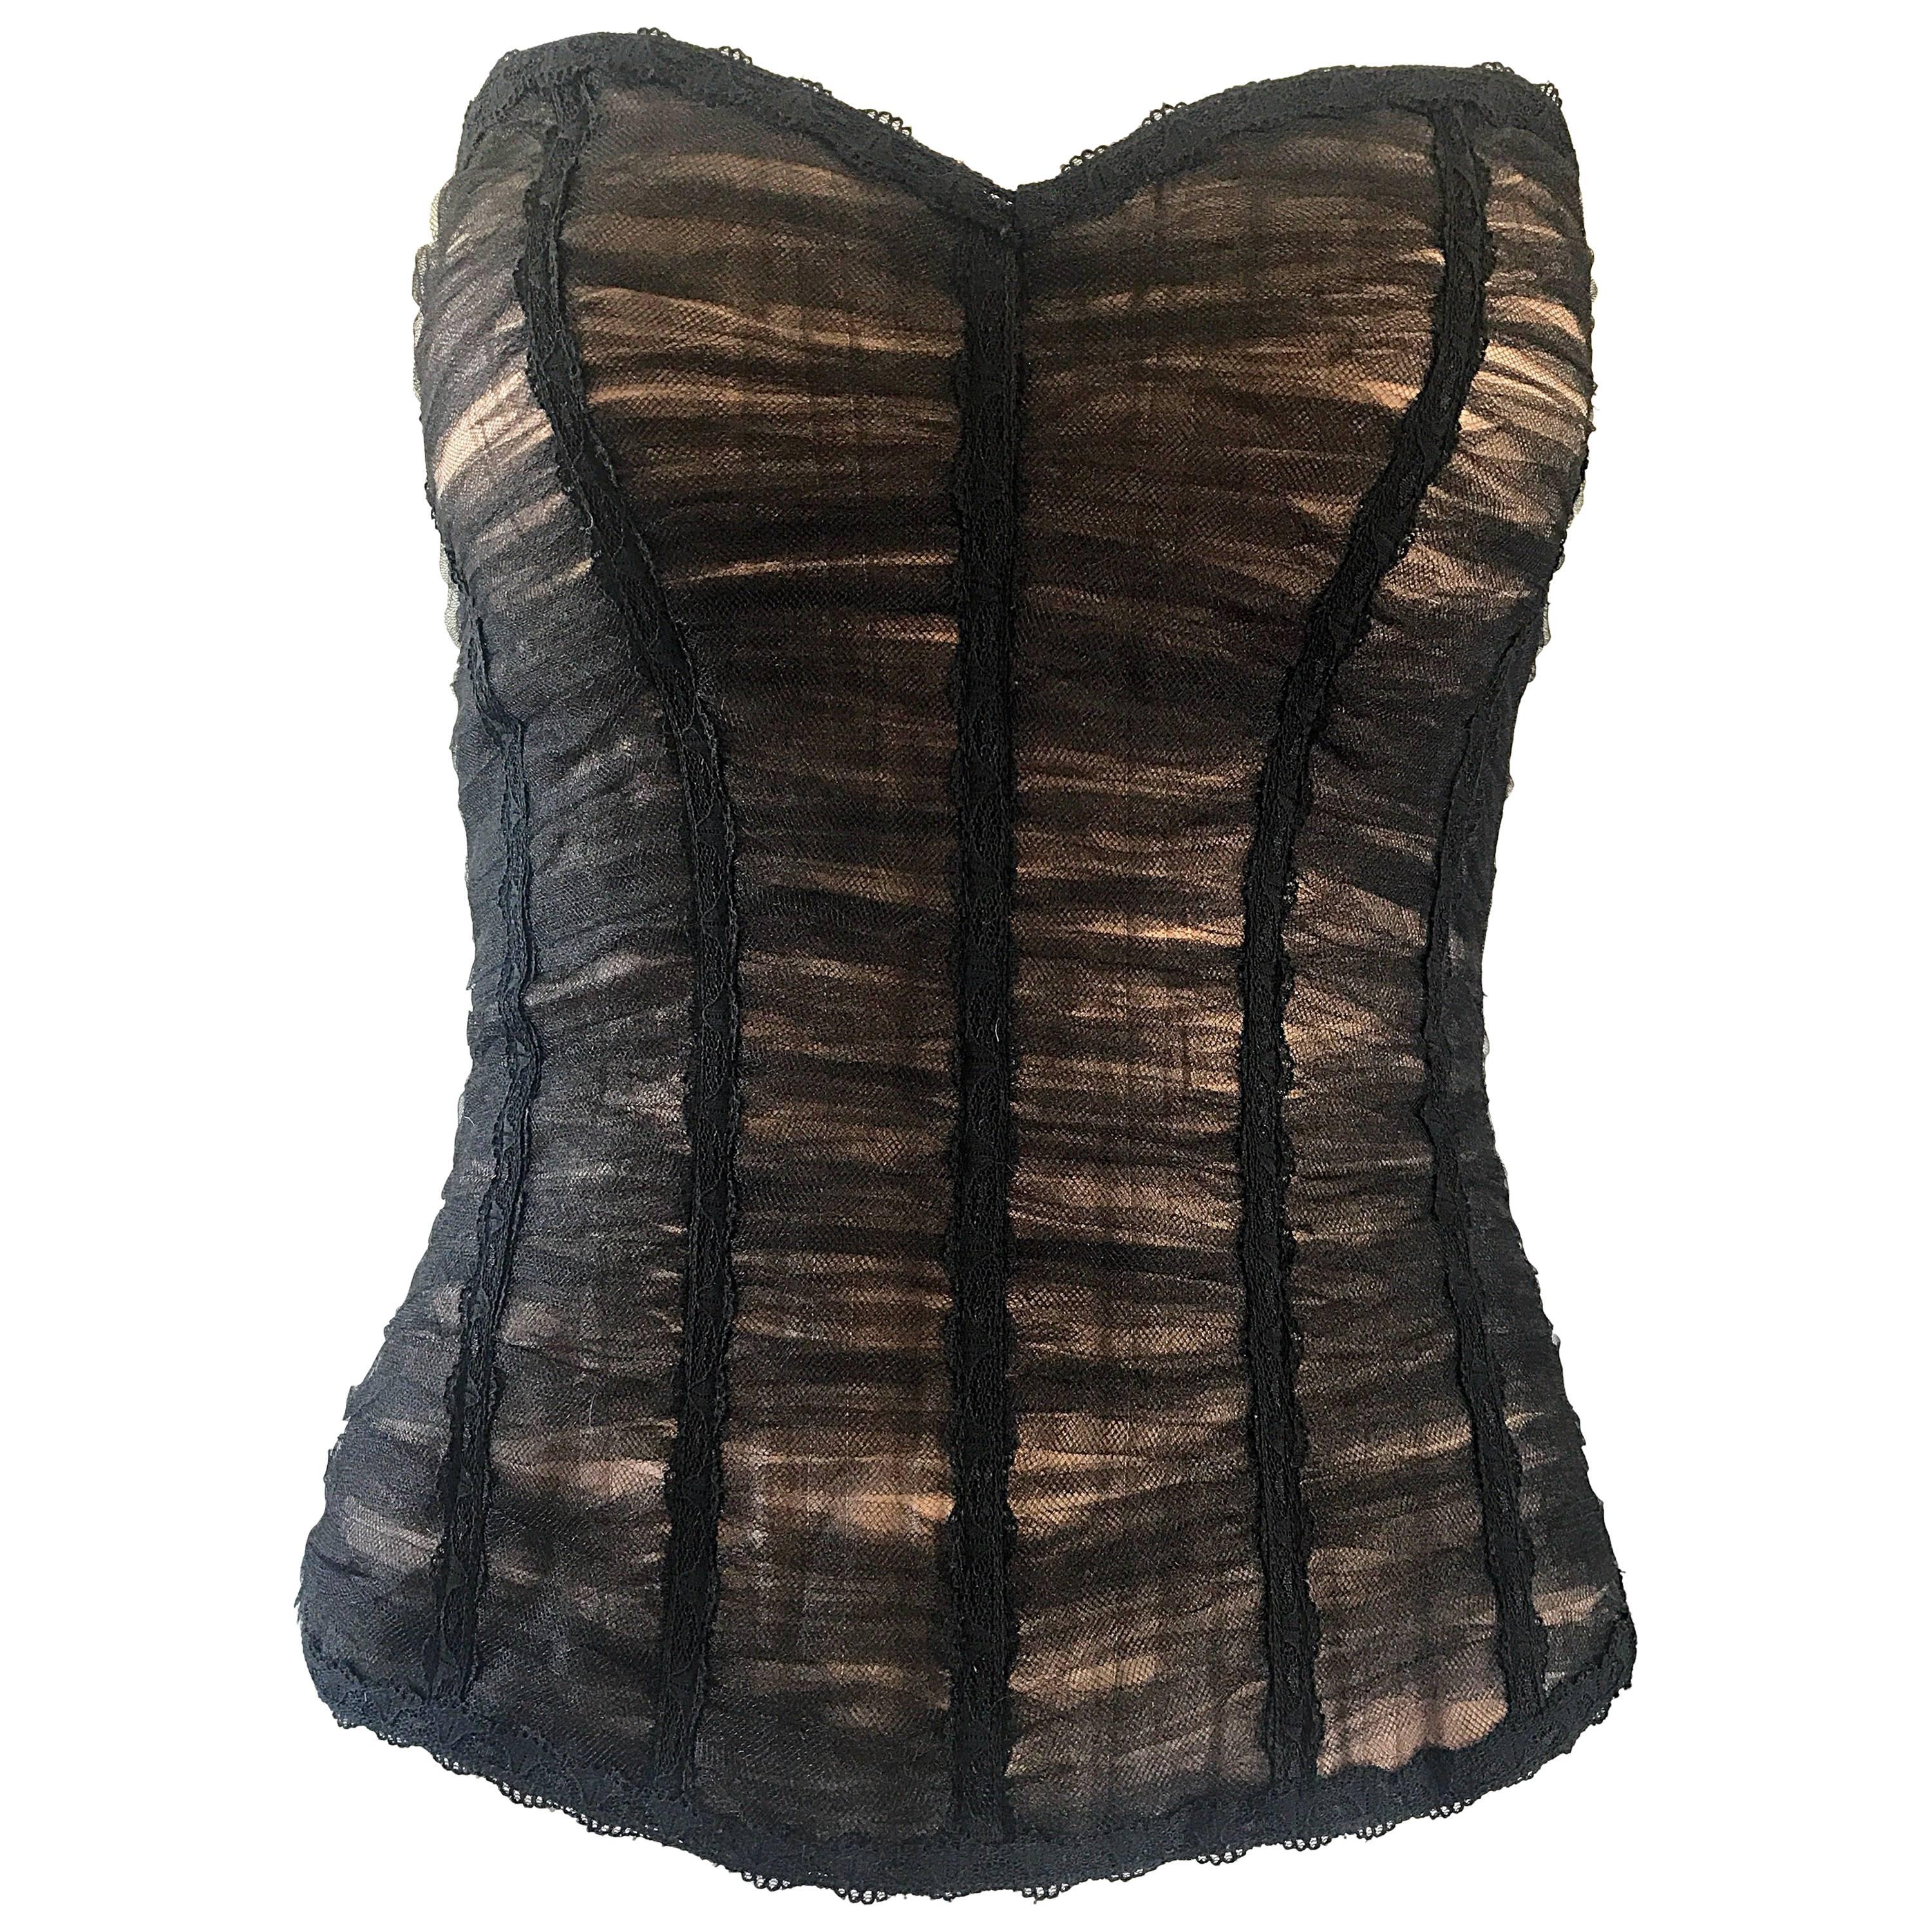 Rene Ruiz Couture Black and Nude Strapless Silk Net Overlay Bustier Corset Top For Sale